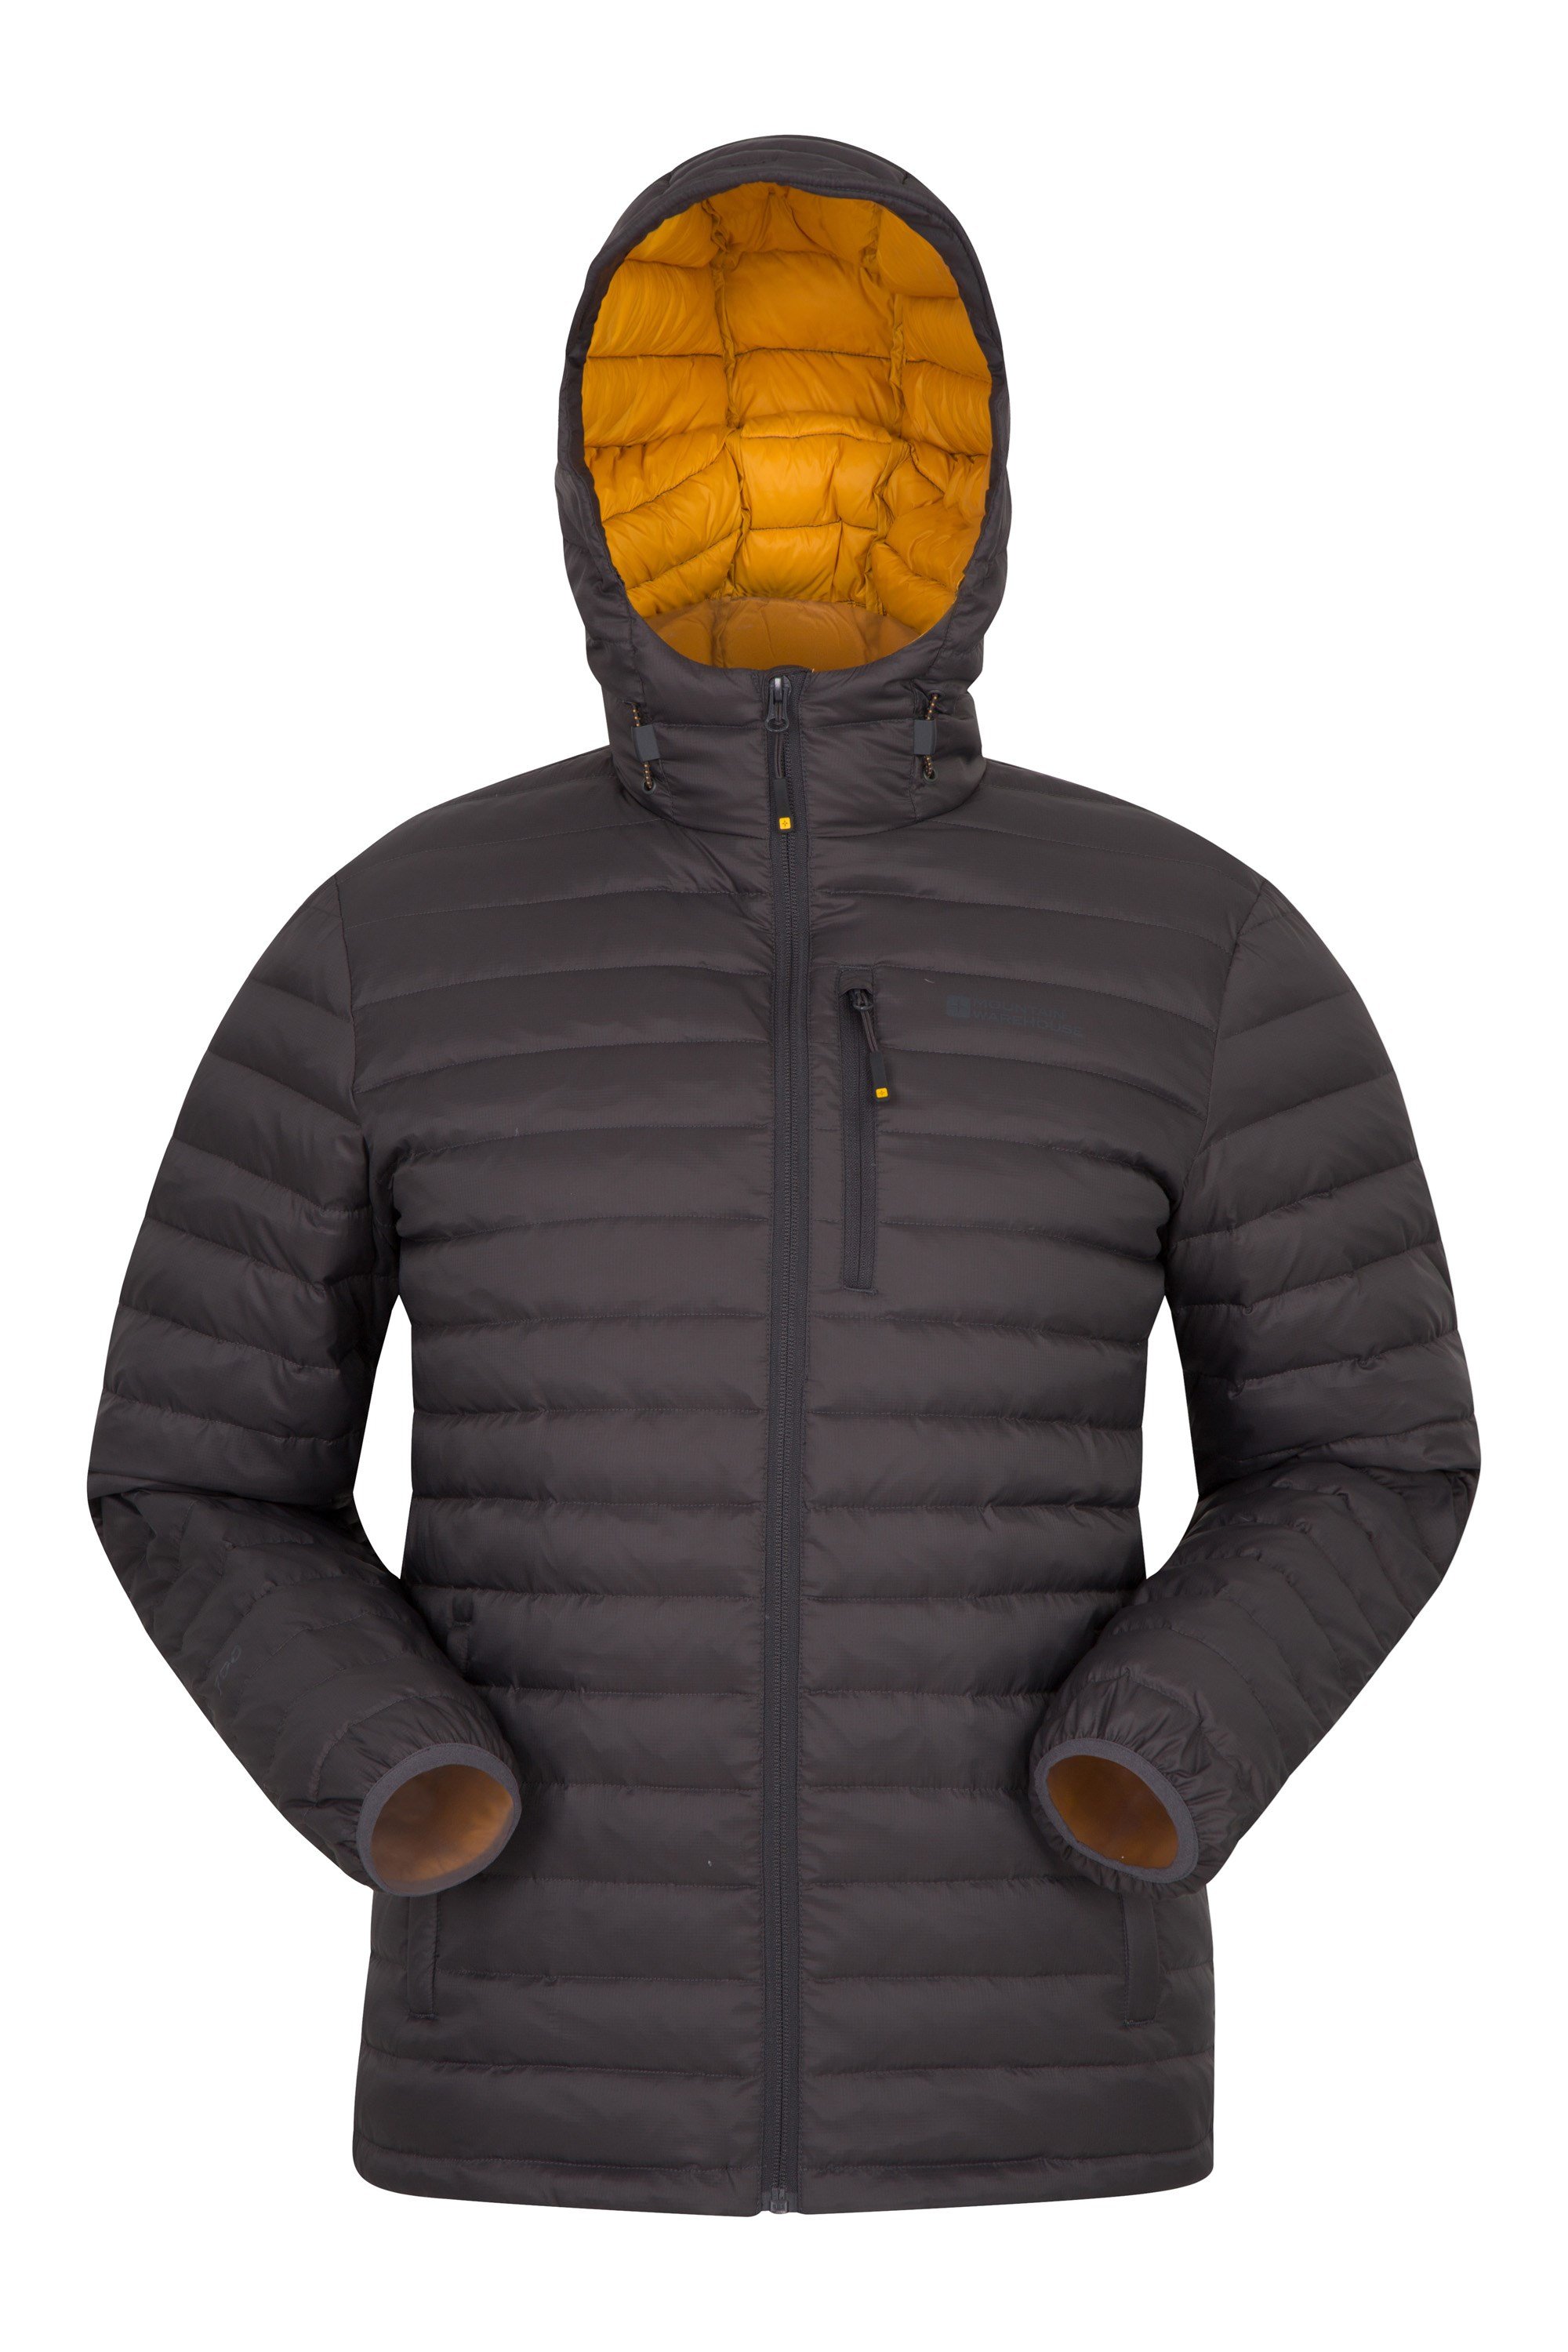 Mountain Warehouse Henry II Extreme Mens Down Padded Jacket Grey